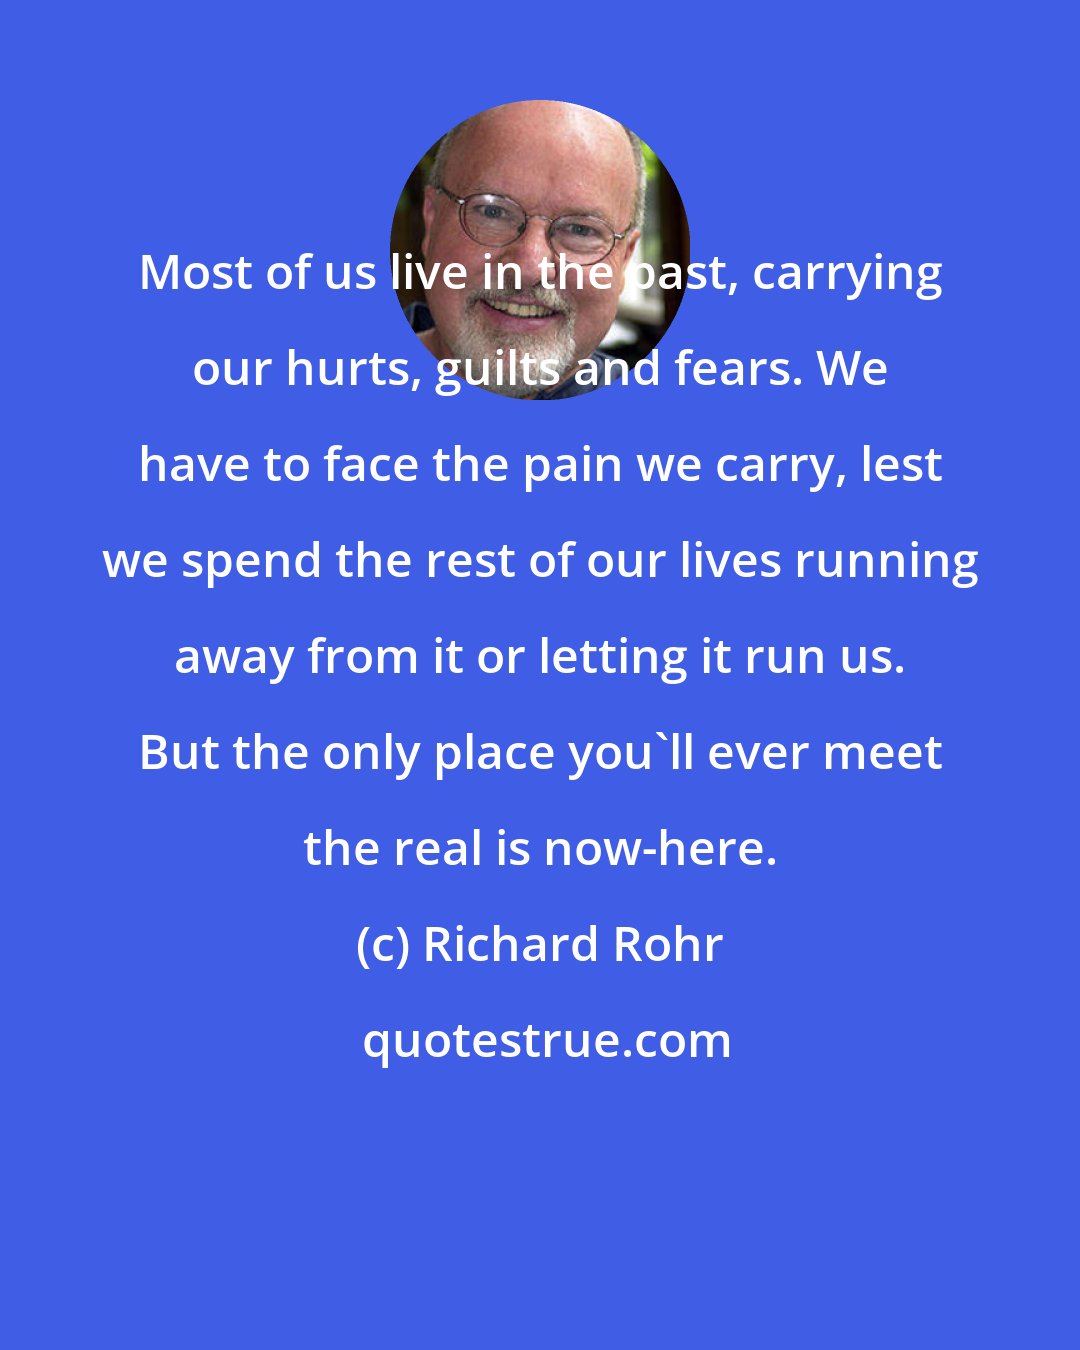 Richard Rohr: Most of us live in the past, carrying our hurts, guilts and fears. We have to face the pain we carry, lest we spend the rest of our lives running away from it or letting it run us. But the only place you'll ever meet the real is now-here.